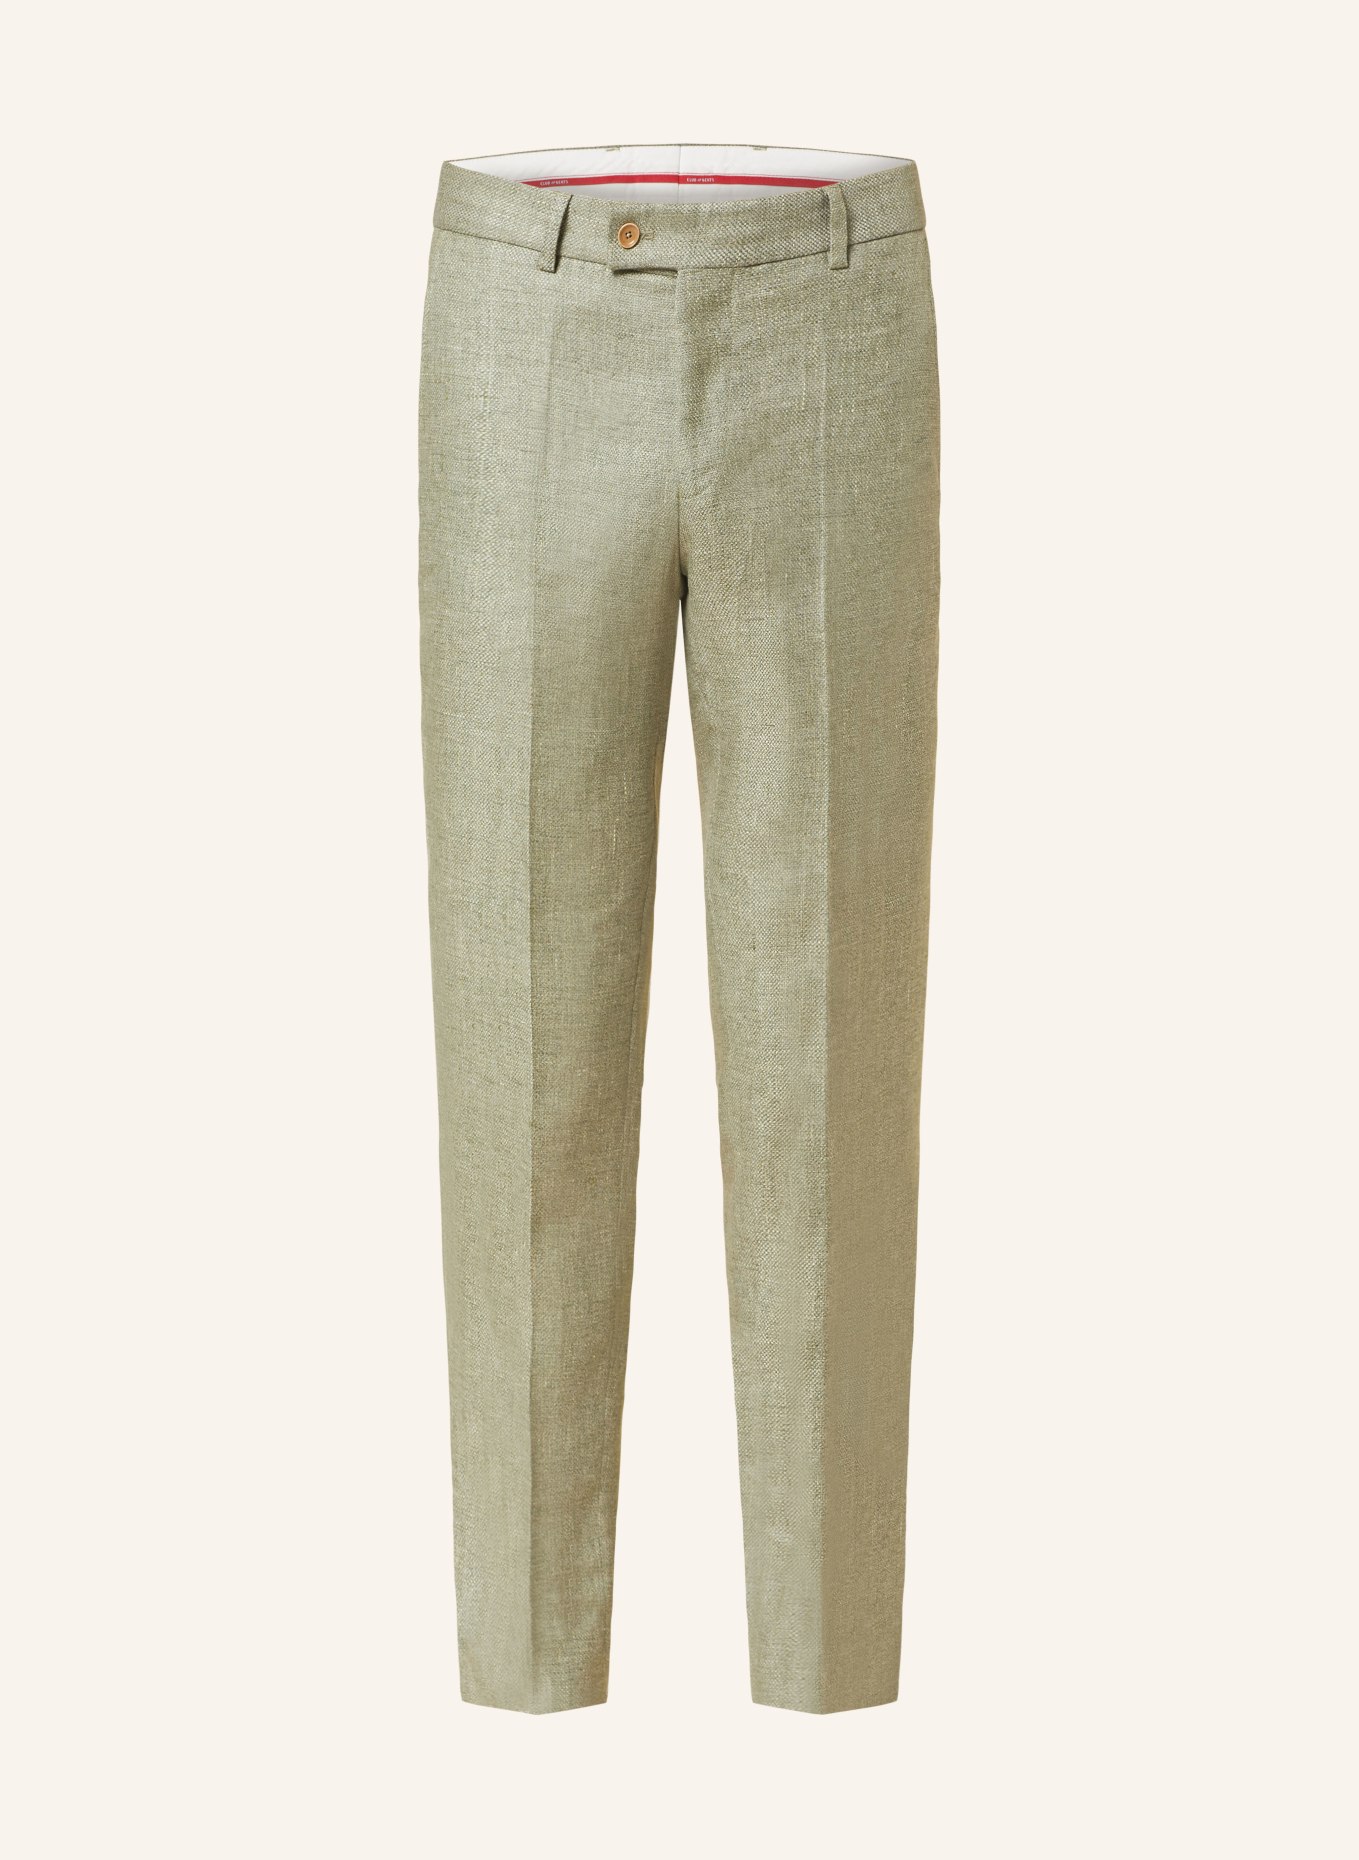 CG - CLUB of GENTS Suit trousers CG PACO slim fit with linen, Color: 52 gruen mittel (Image 1)